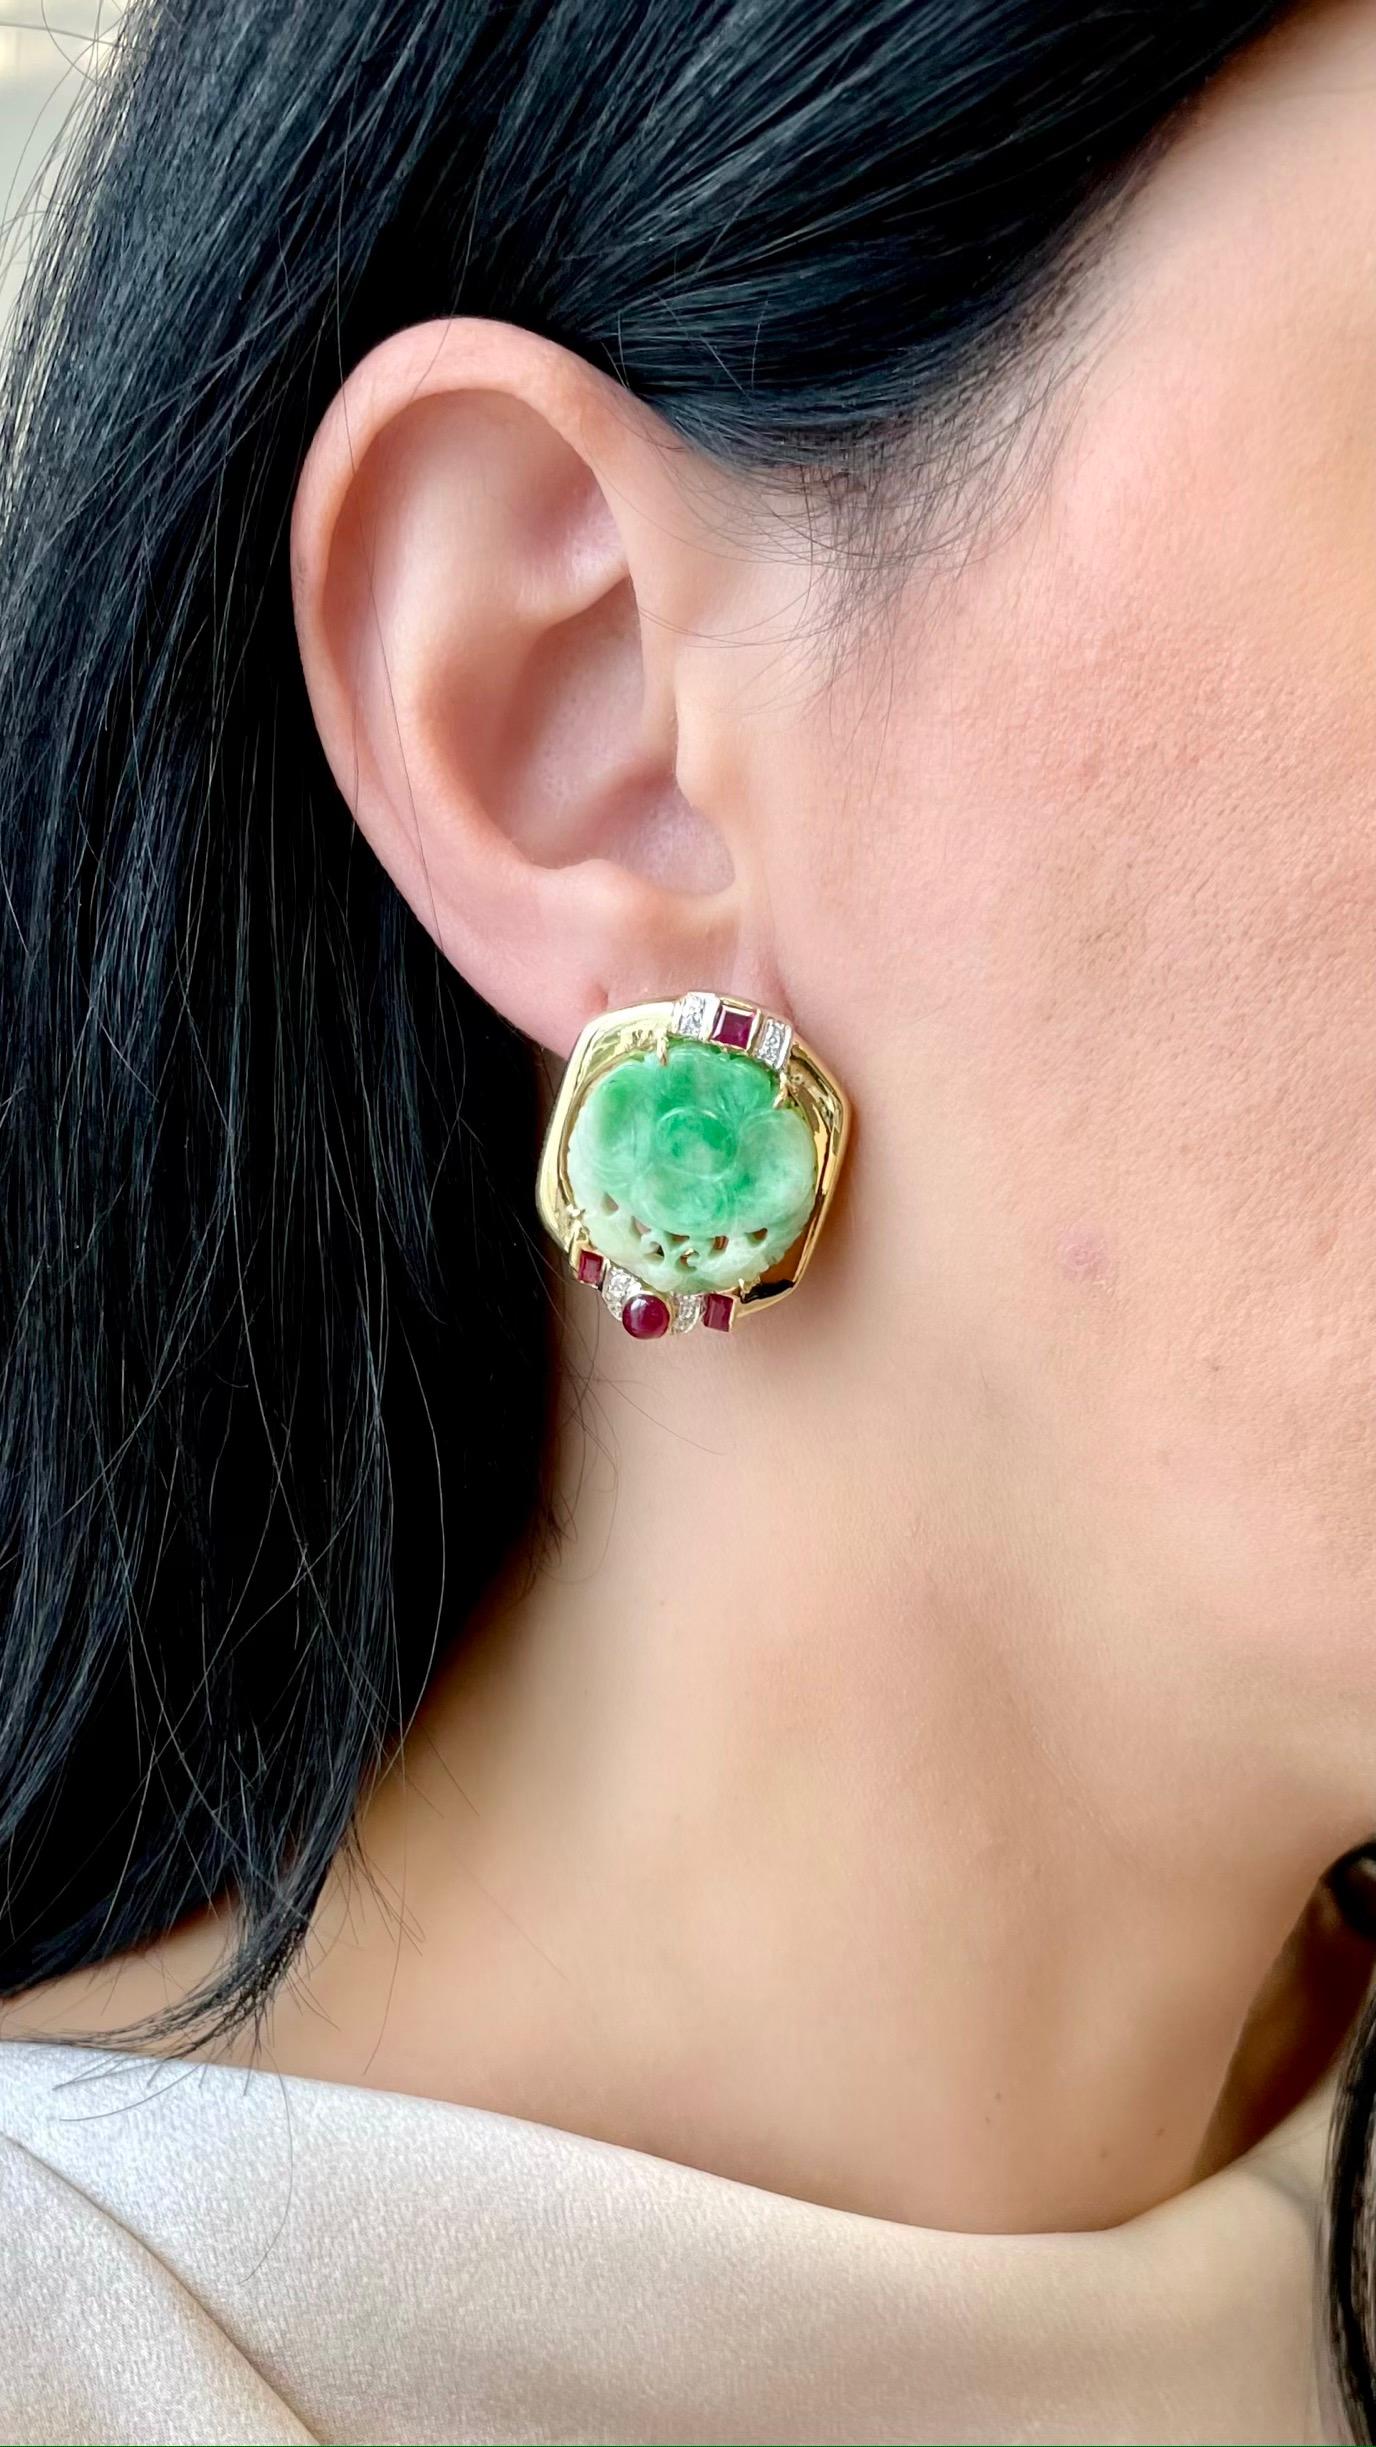 These amazing earrings feature a round-shaped plaque of hand-carved jade with an ornate floral design, rubies & diamond crafted in 18k yellow gold.

The carved jade is prong-set, measuring 21.4 mm x 21.8 mm, and is framed by a high-polish gold